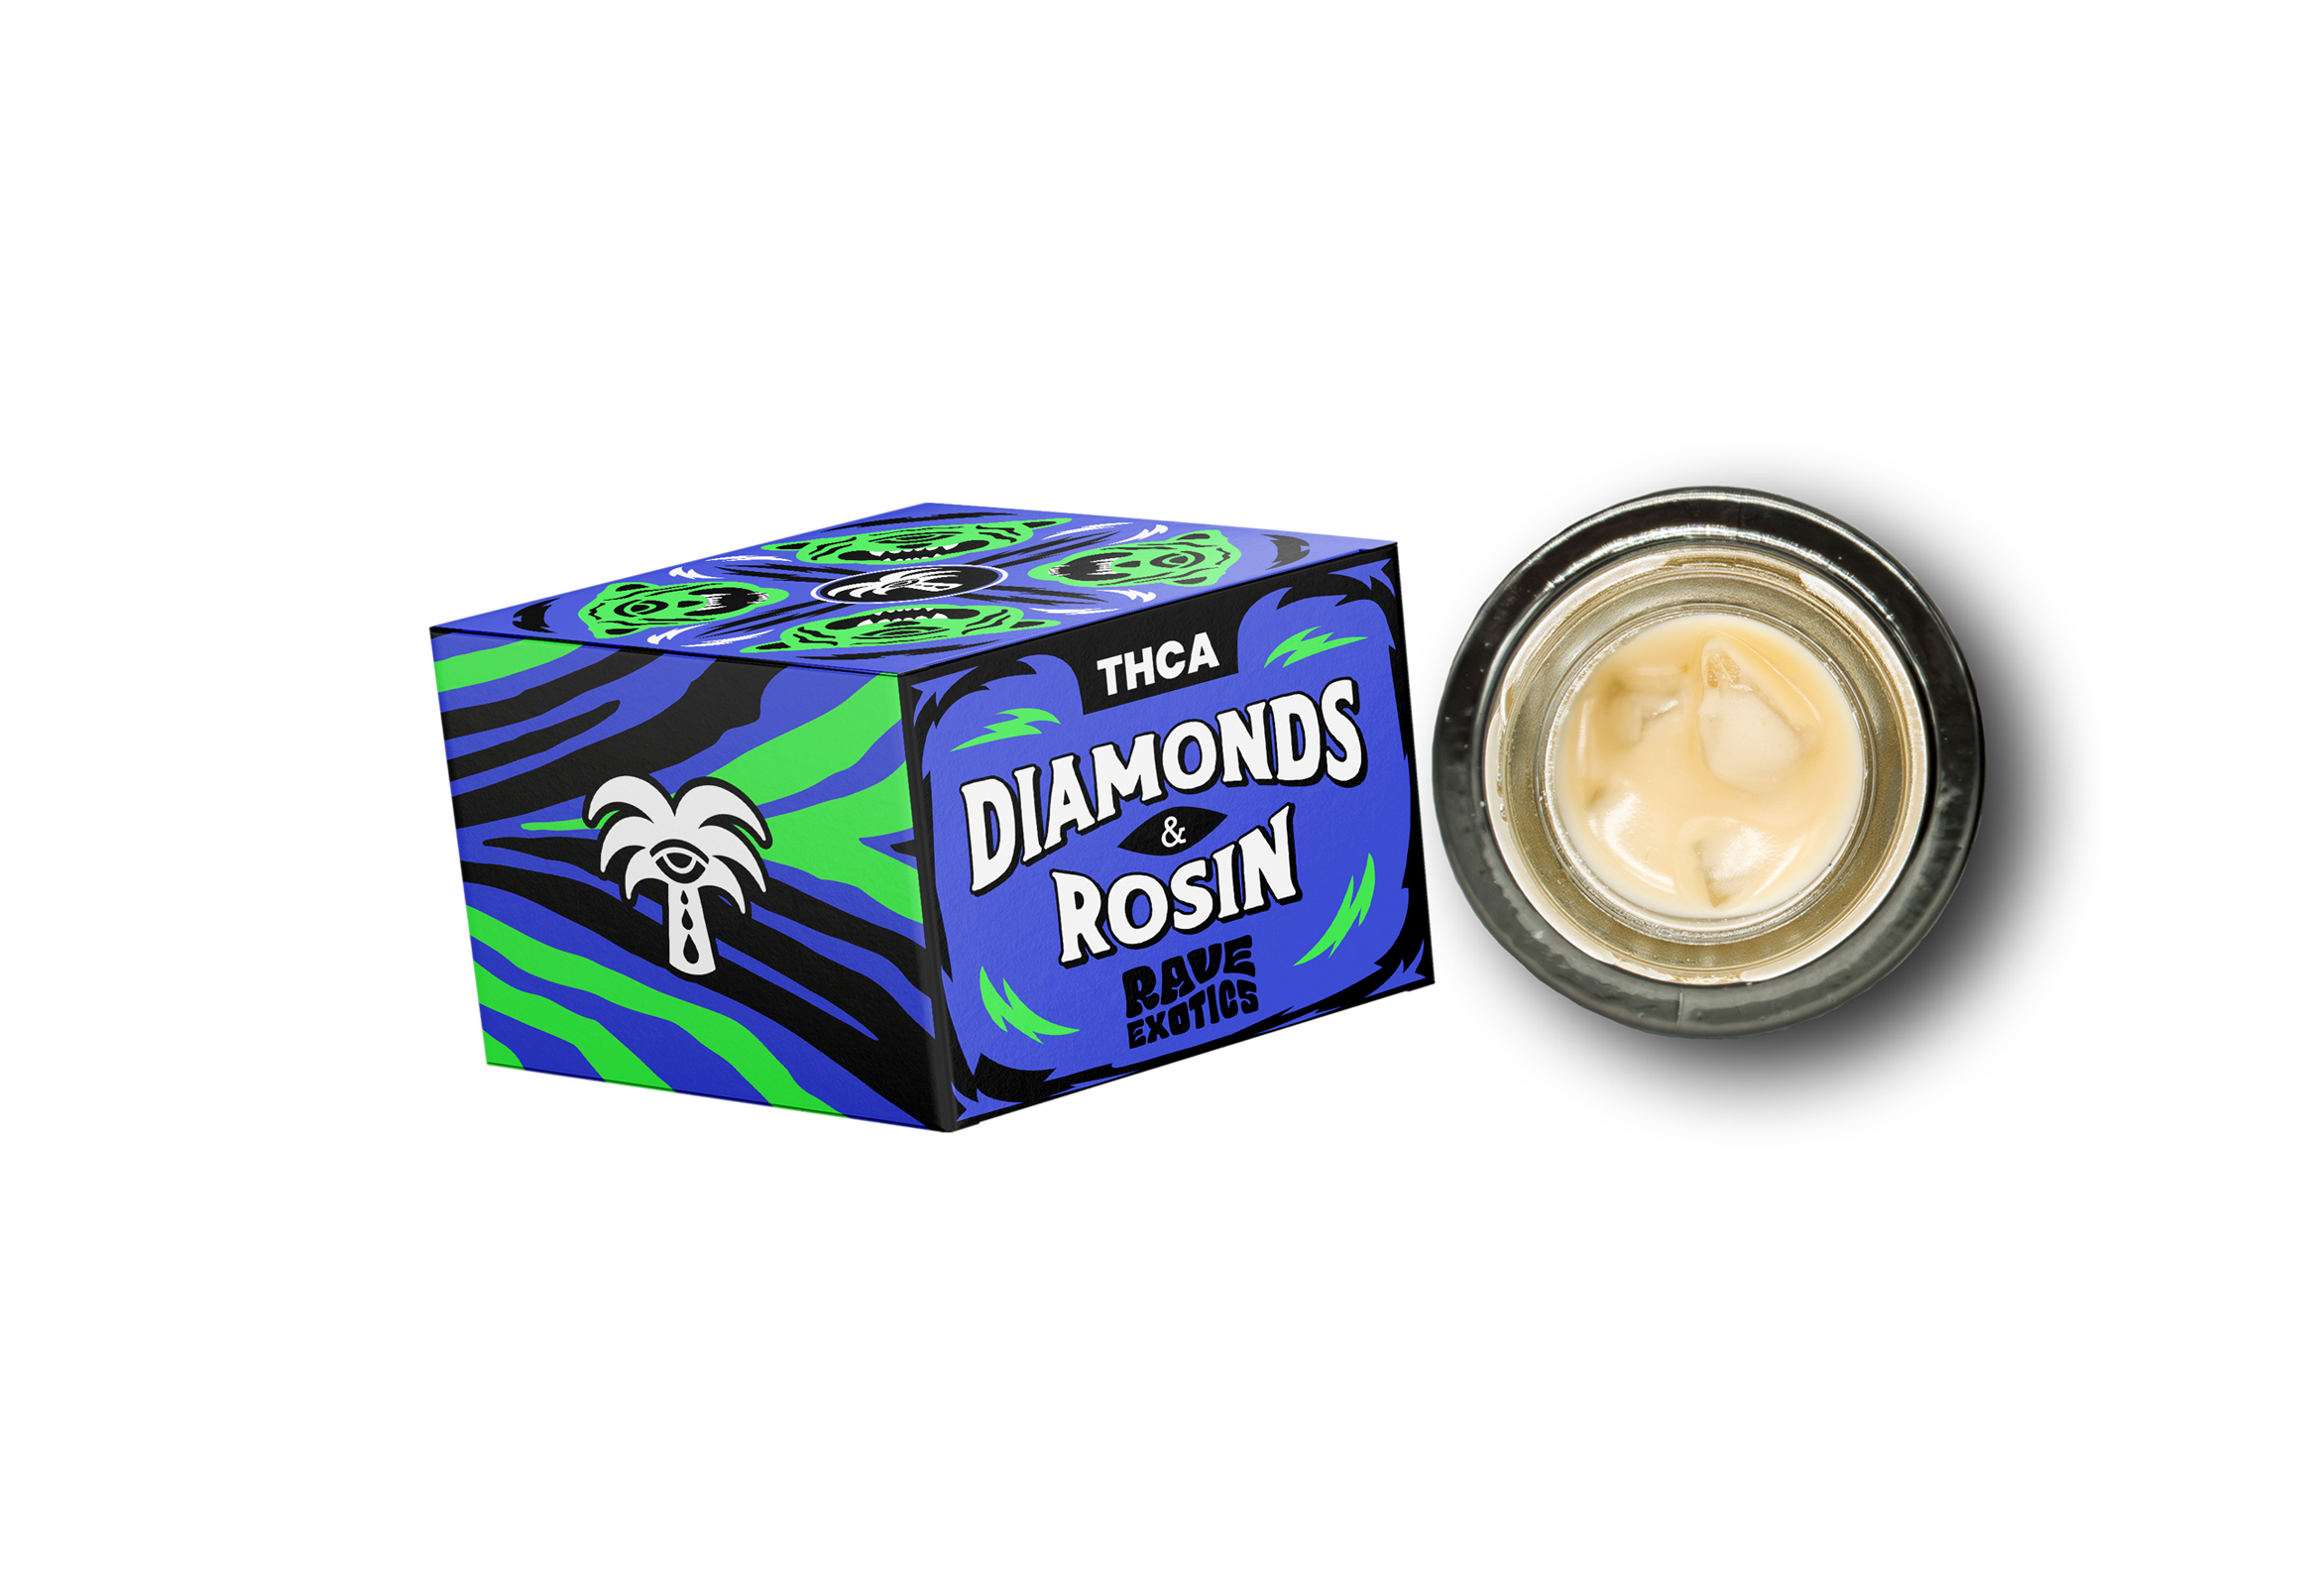 tropical blue and green packaging of rave exotics THCA diamond and rosin